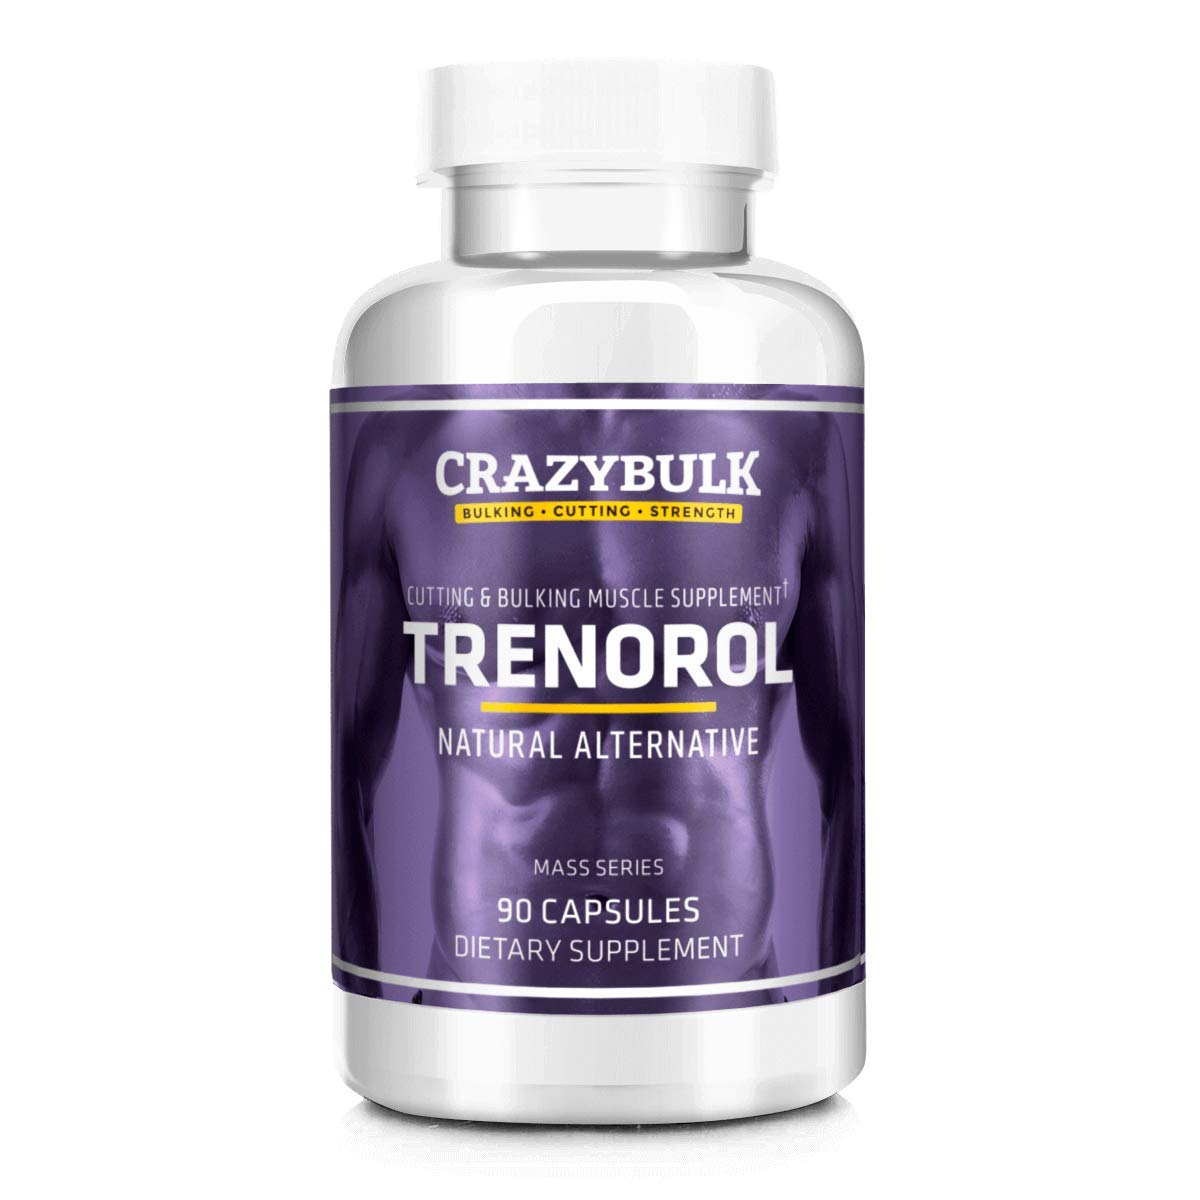 TRENOROL BOTTLE - Does Tren Affect Sleep? Uncovering the Truth